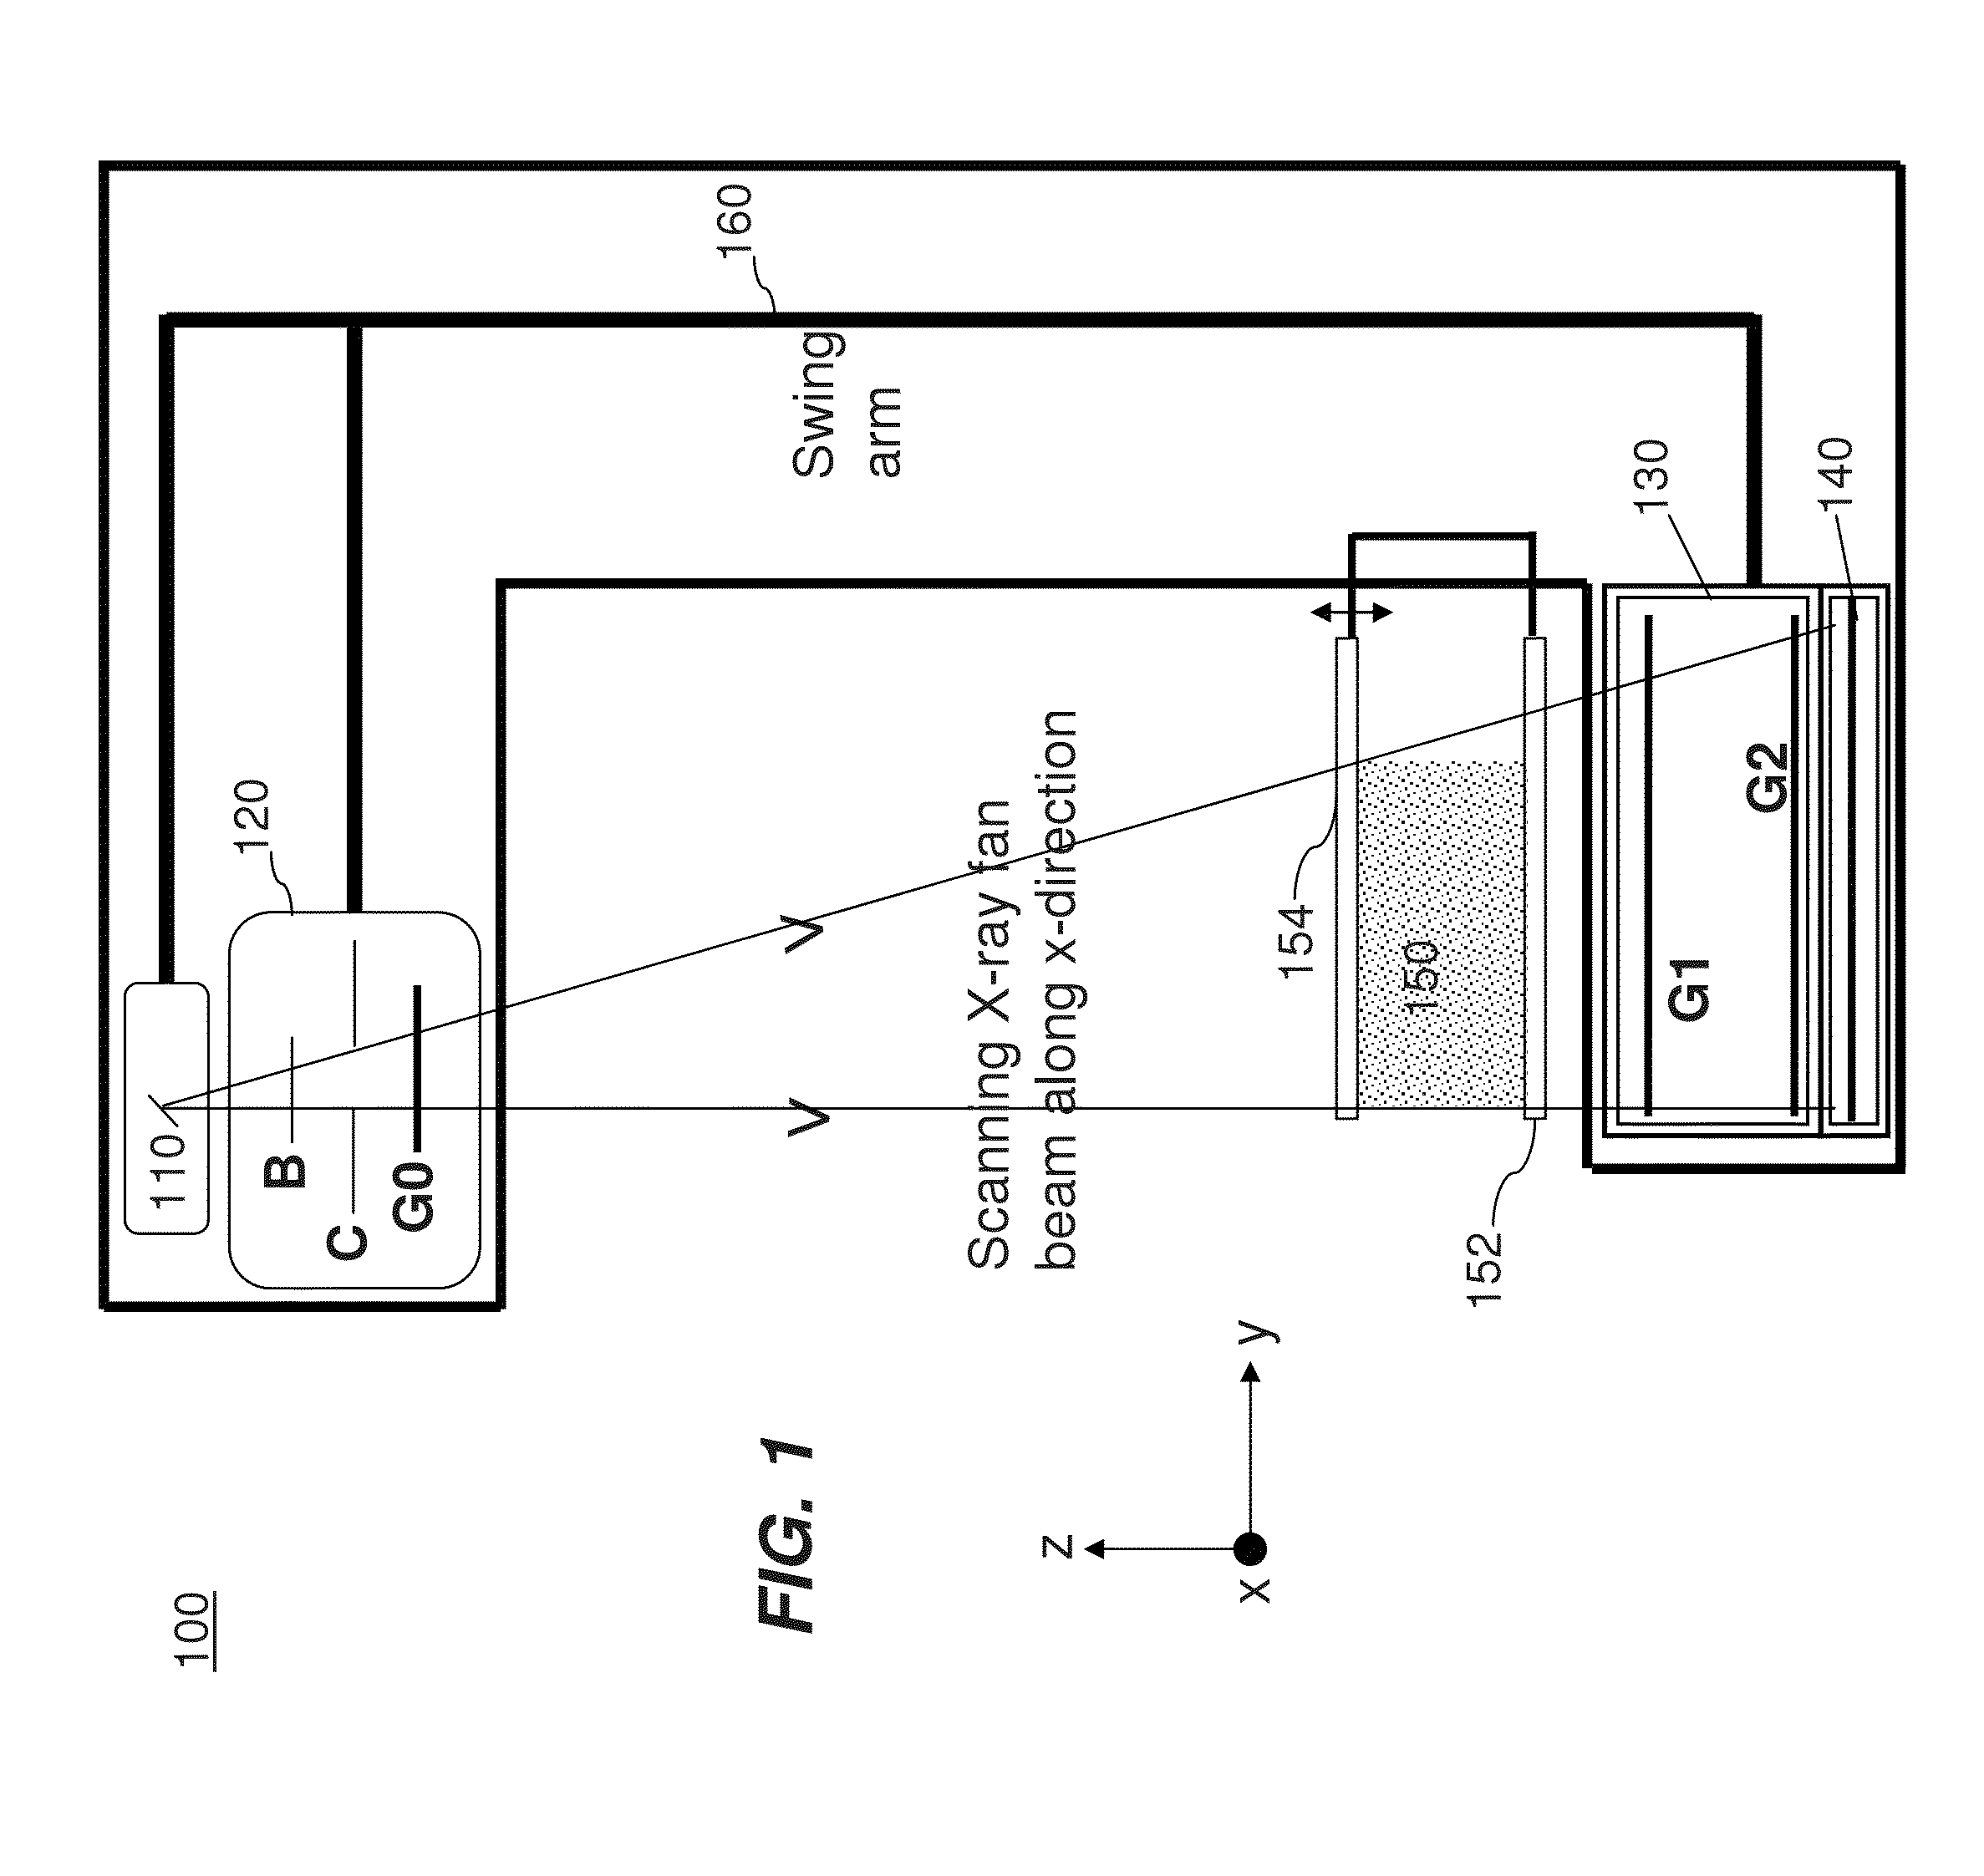 Grating-based differential phase contrast imaging system with adjustable capture technique for medical radiographic imaging